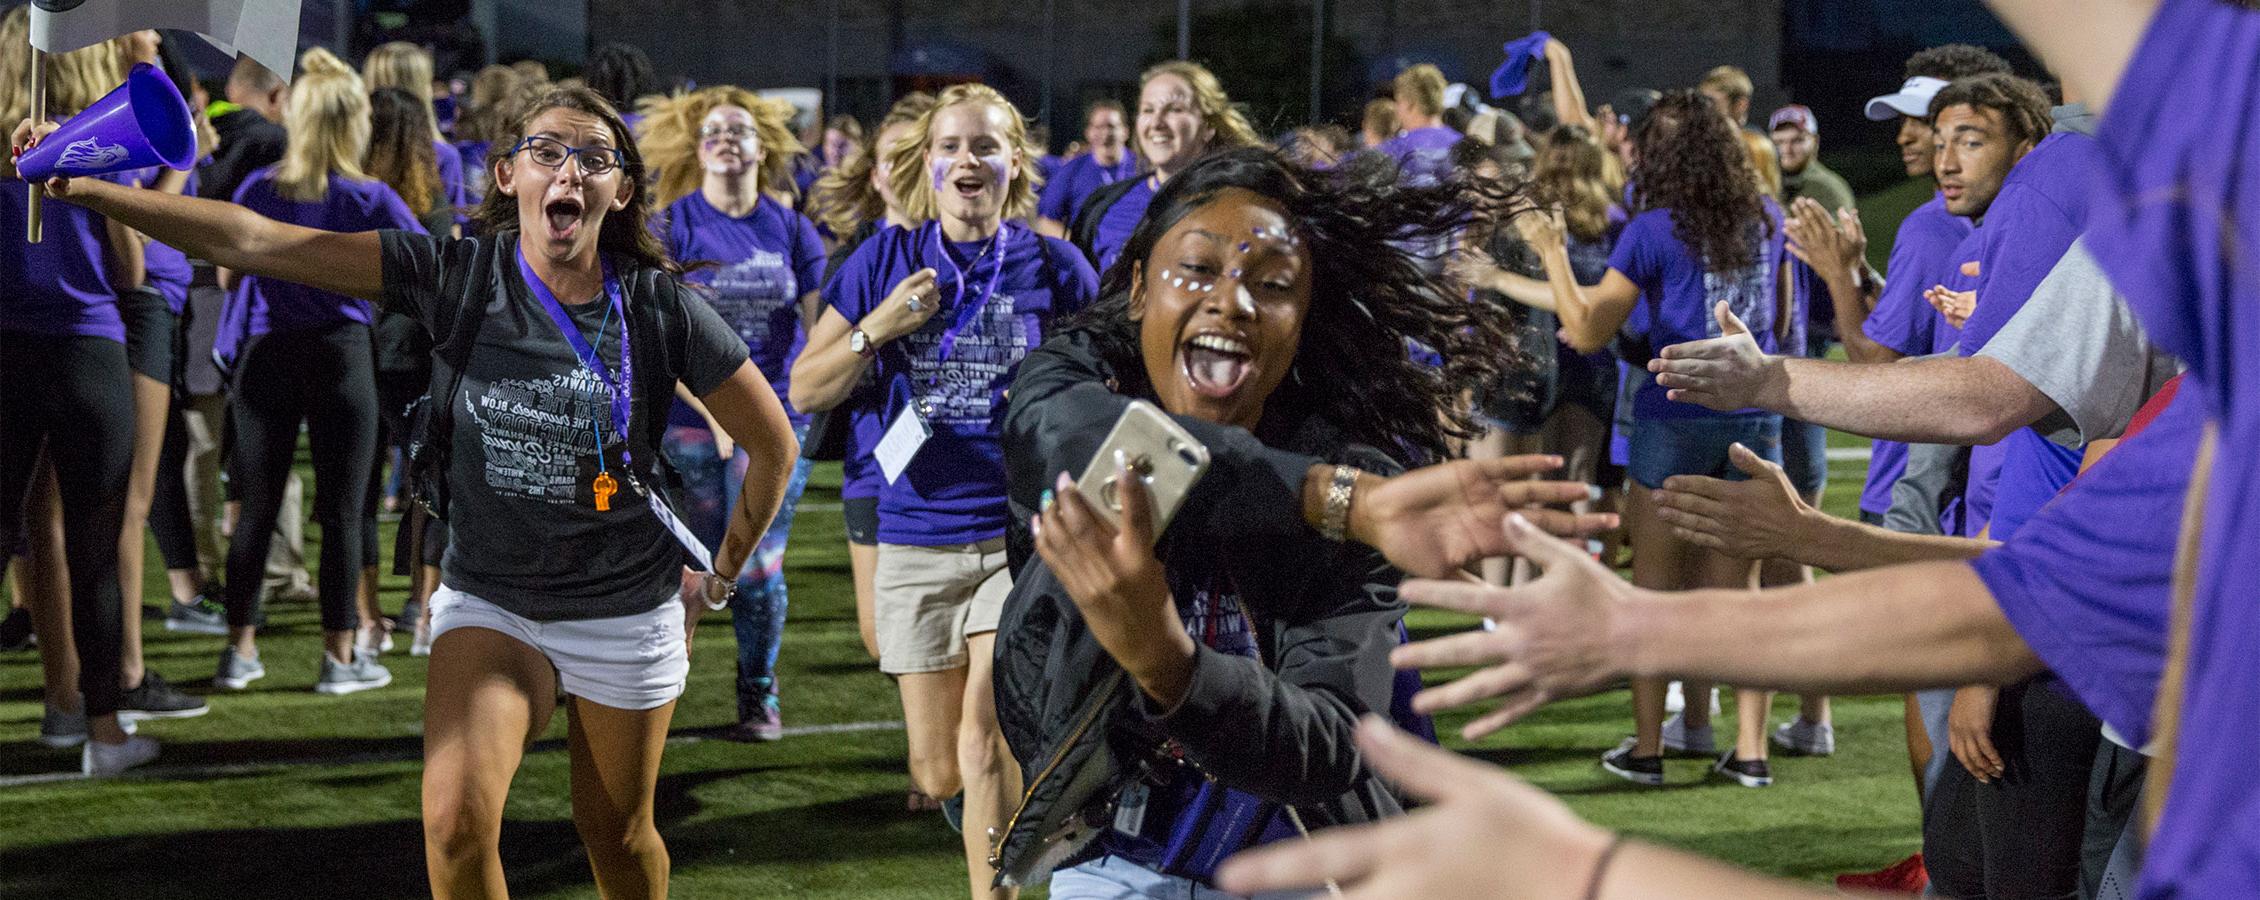  First-year students (freshman) & their peer mentors run through a human welcome tunnel of students & staff.